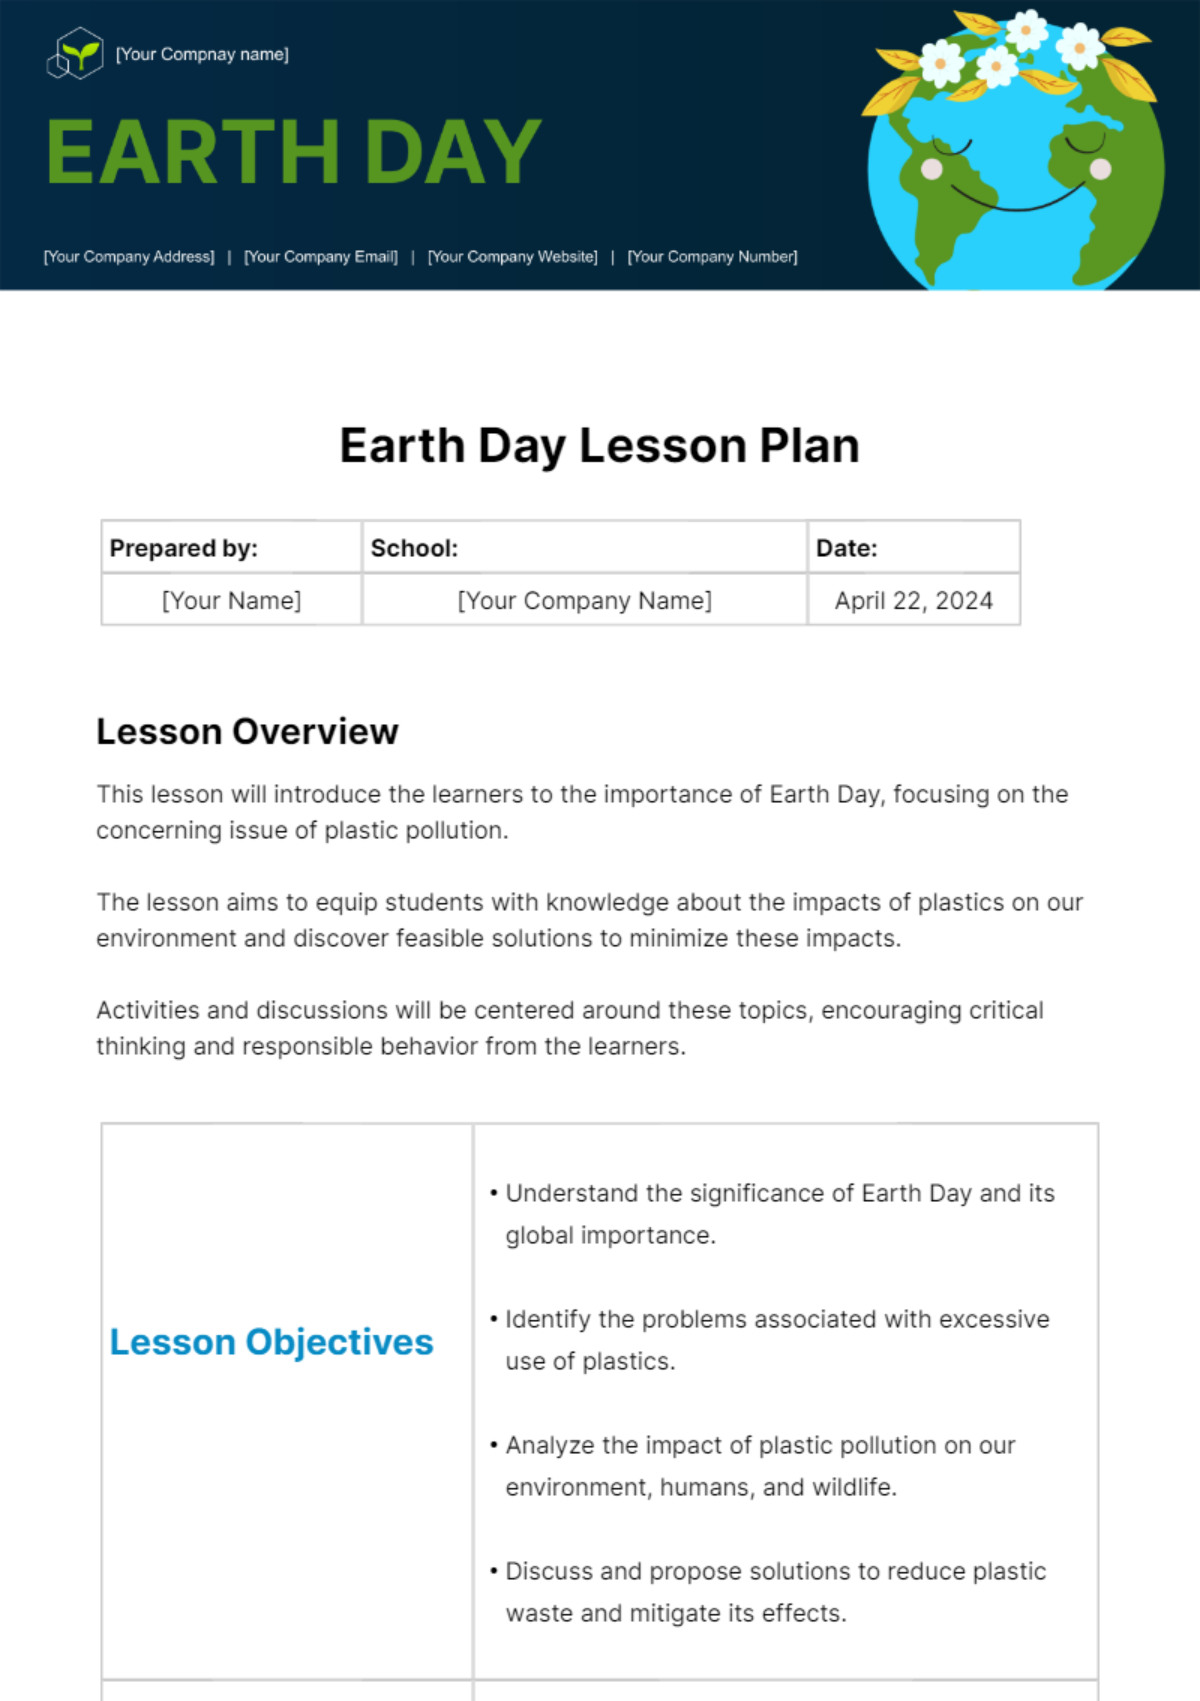 Earth Day Lesson Plan Template